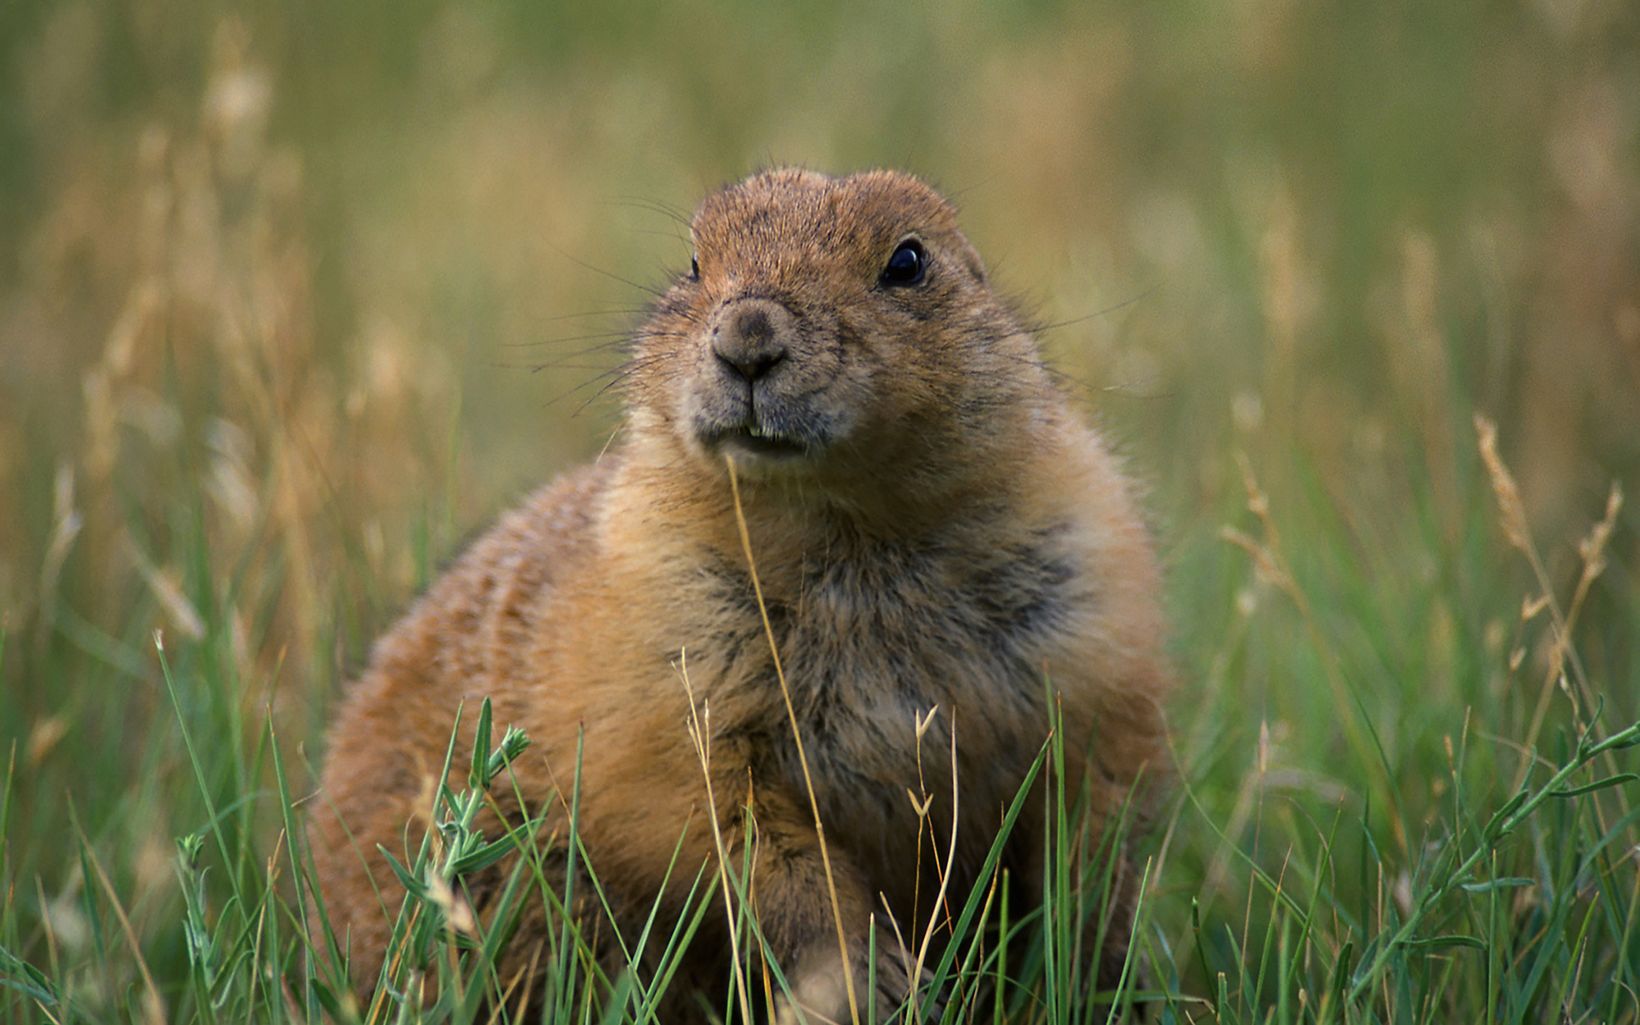 Prairie dog looking angelic in the grass.